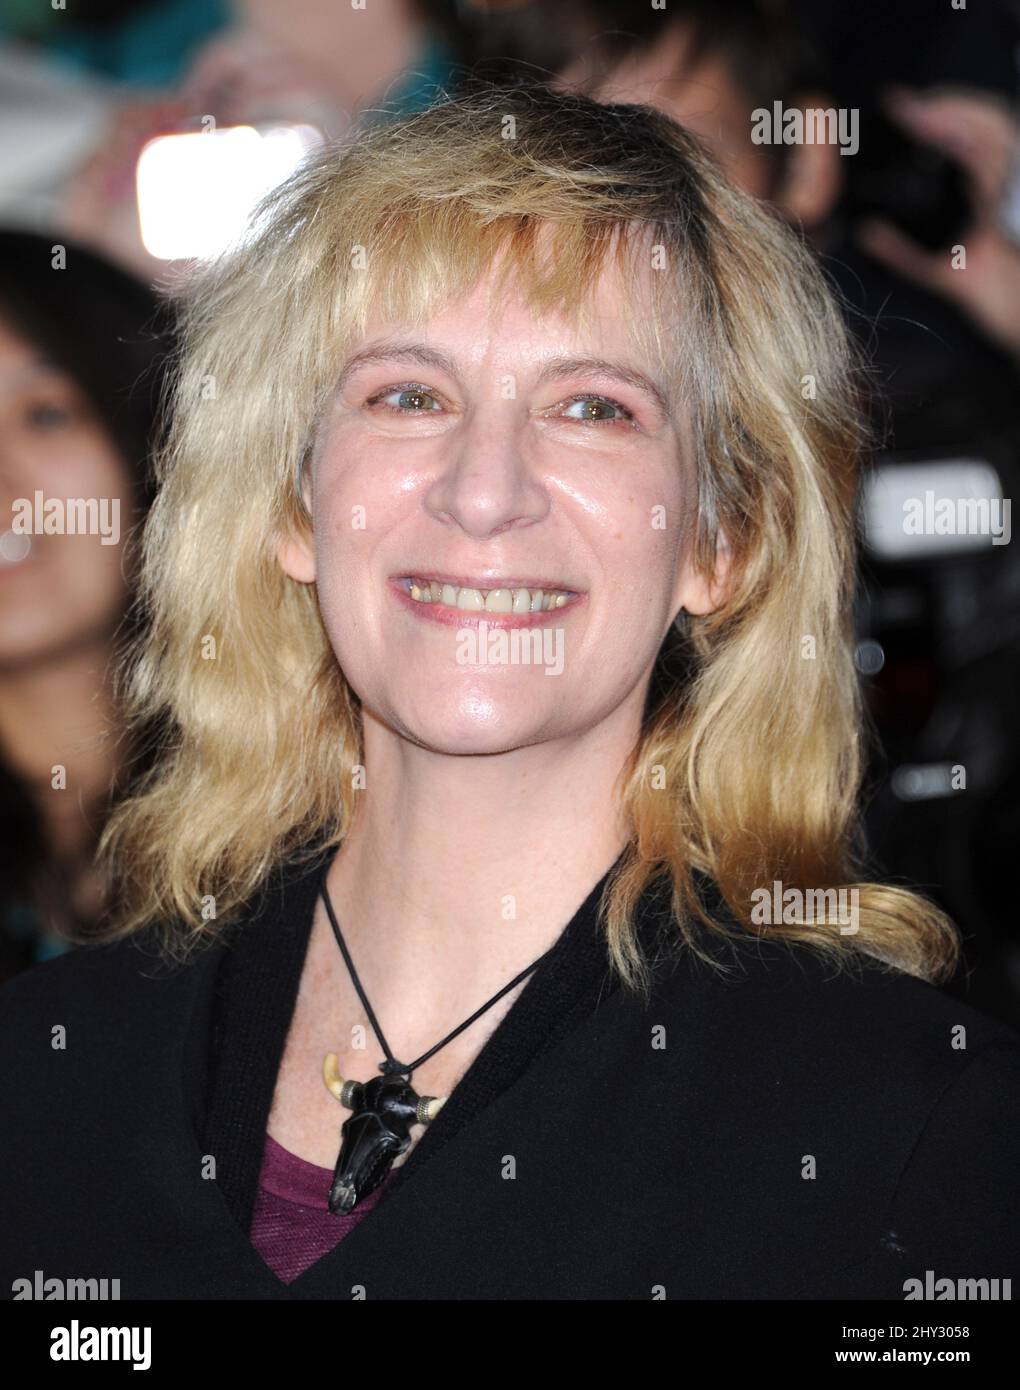 Amanda Plummer attending the premiere of 'The Hunger Games: Catching Fire' in Los Angeles, California. Stock Photo